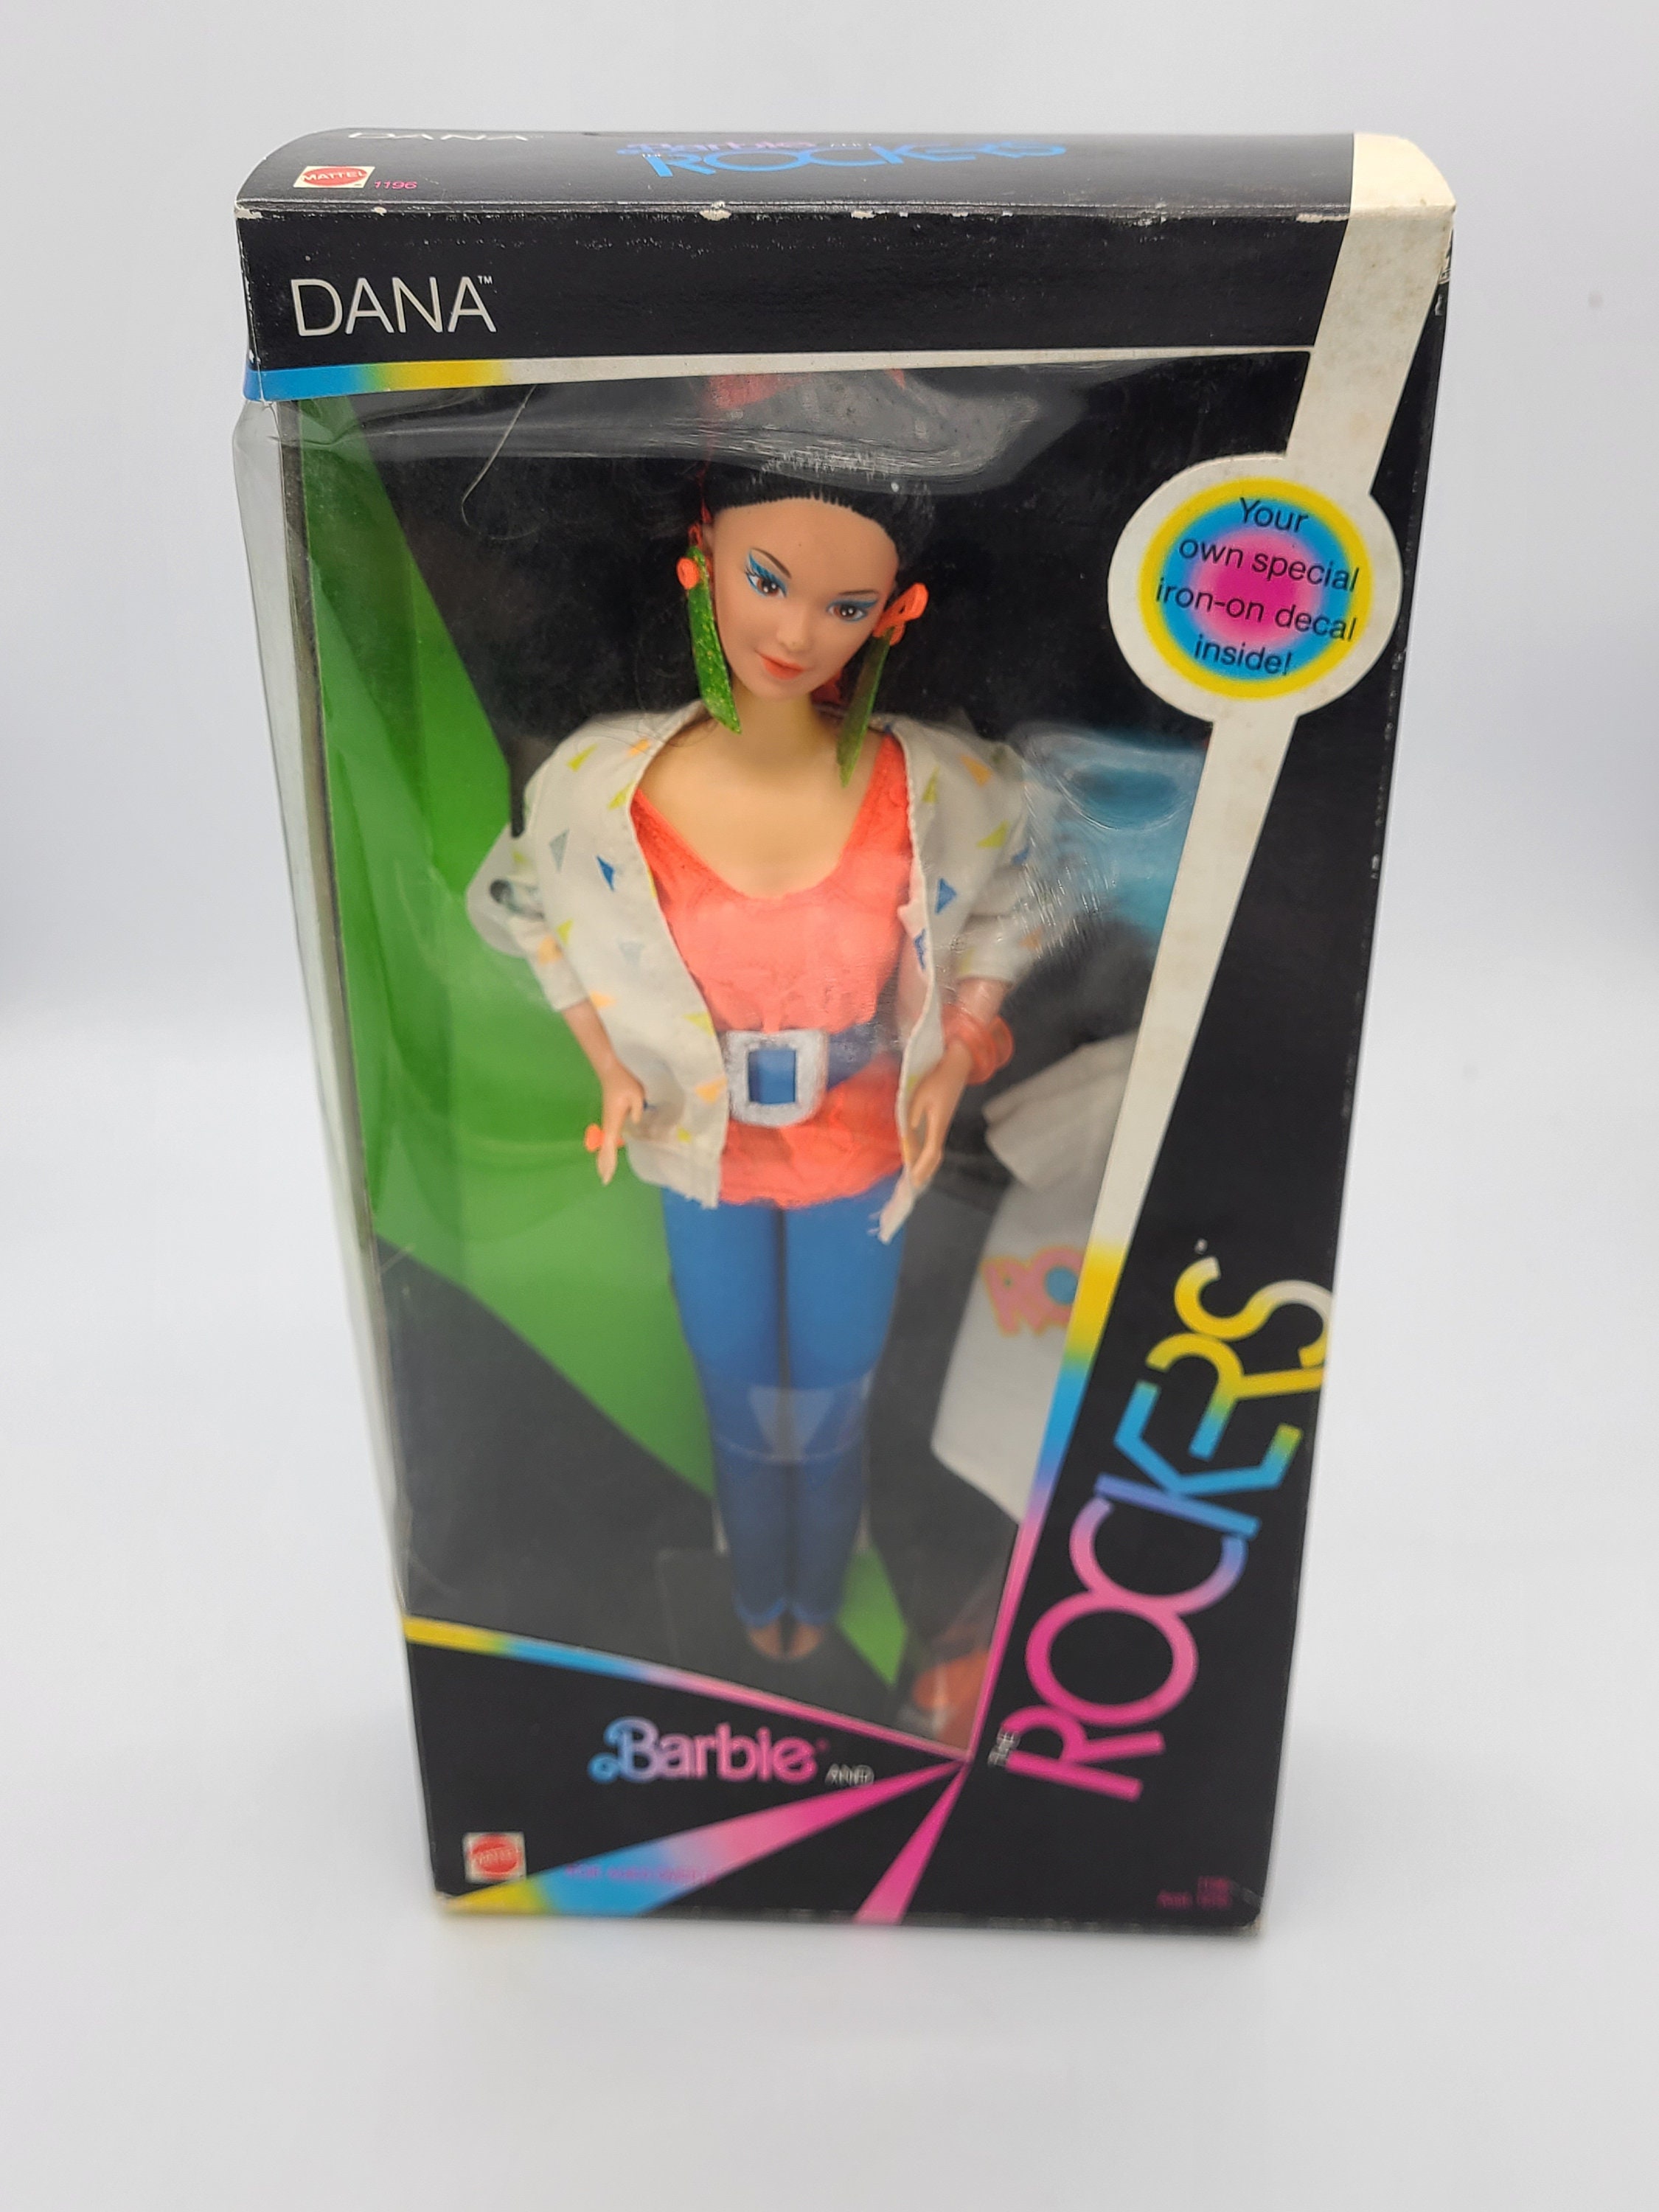 1985 Dana Rocker Barbie Doll From Barbie and the Rockers. in Box. 